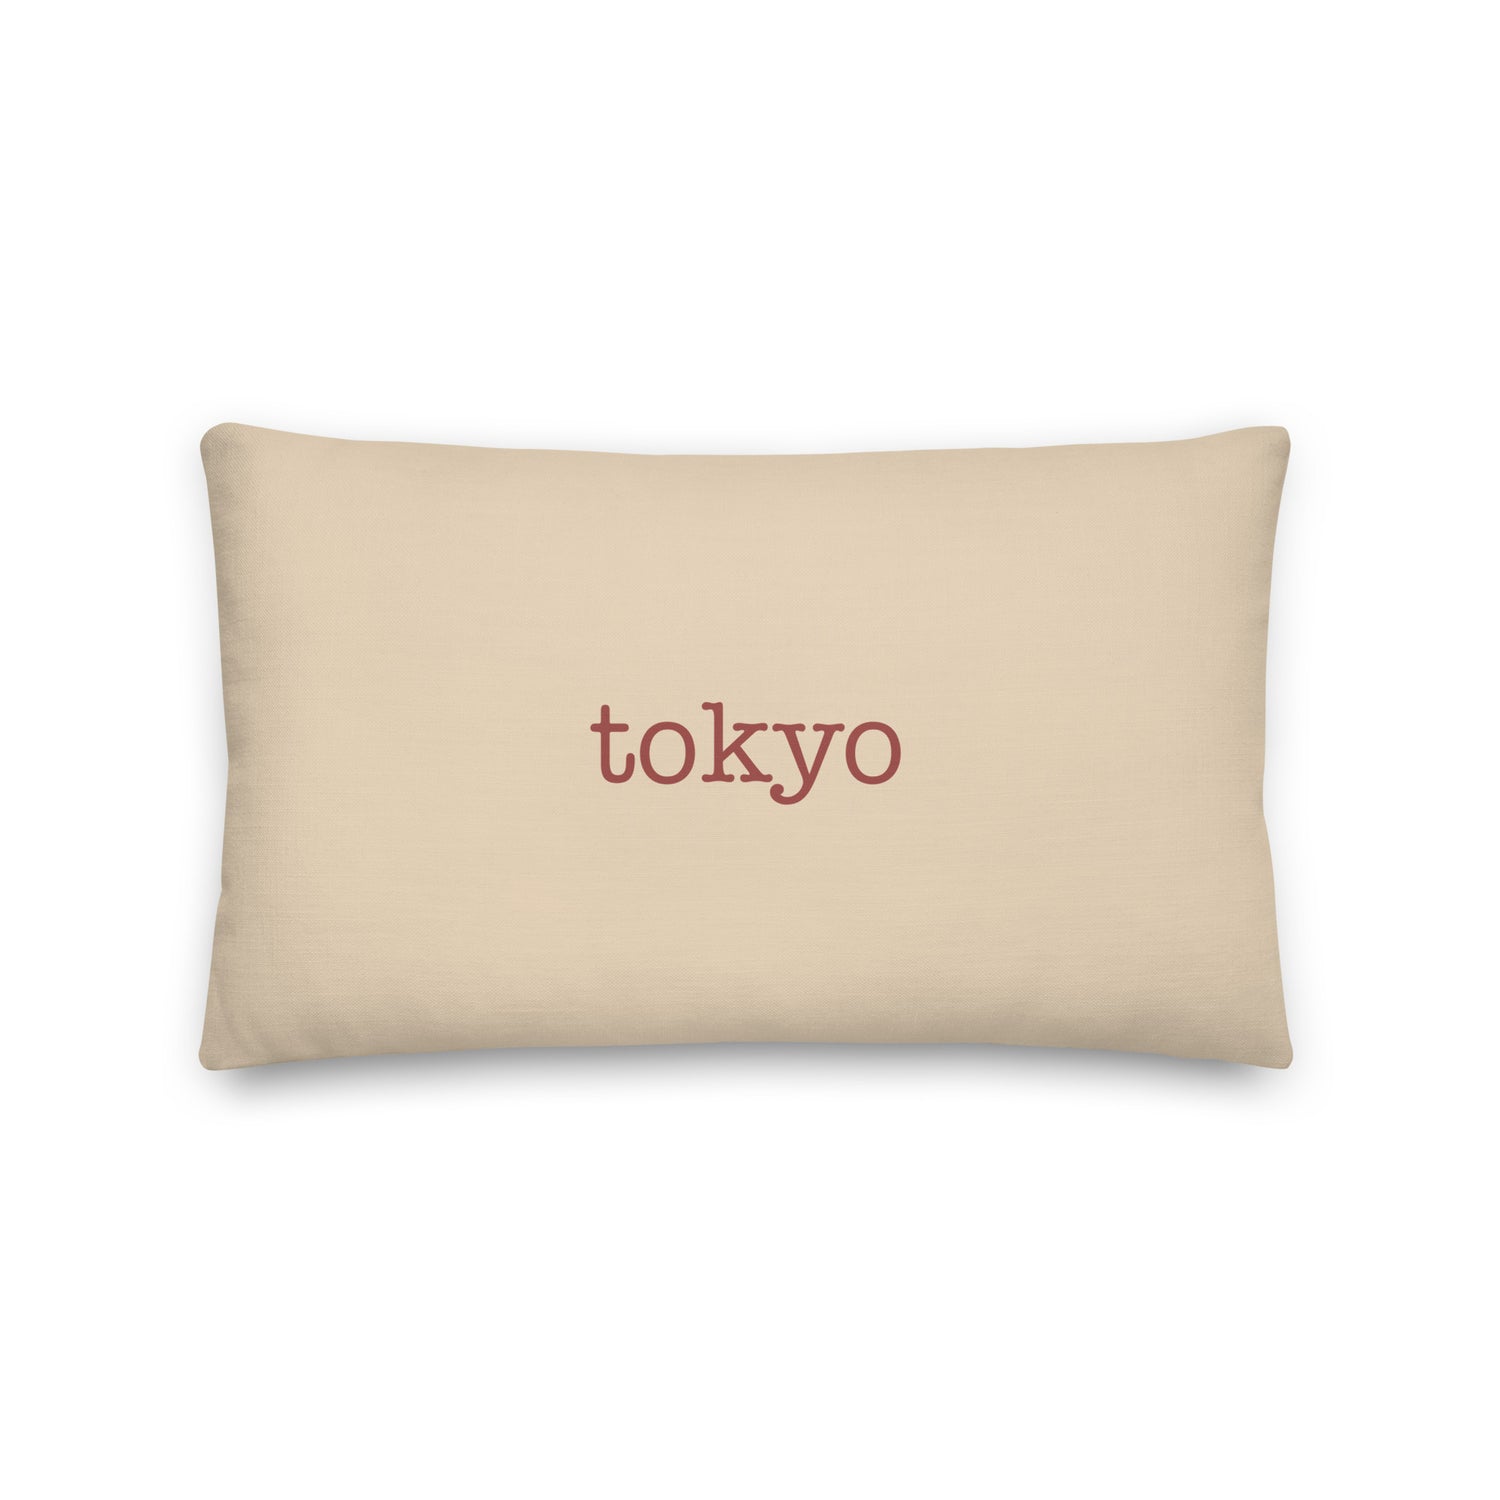 Tokyo Japan Pillows and Blankets • HND Airport Code